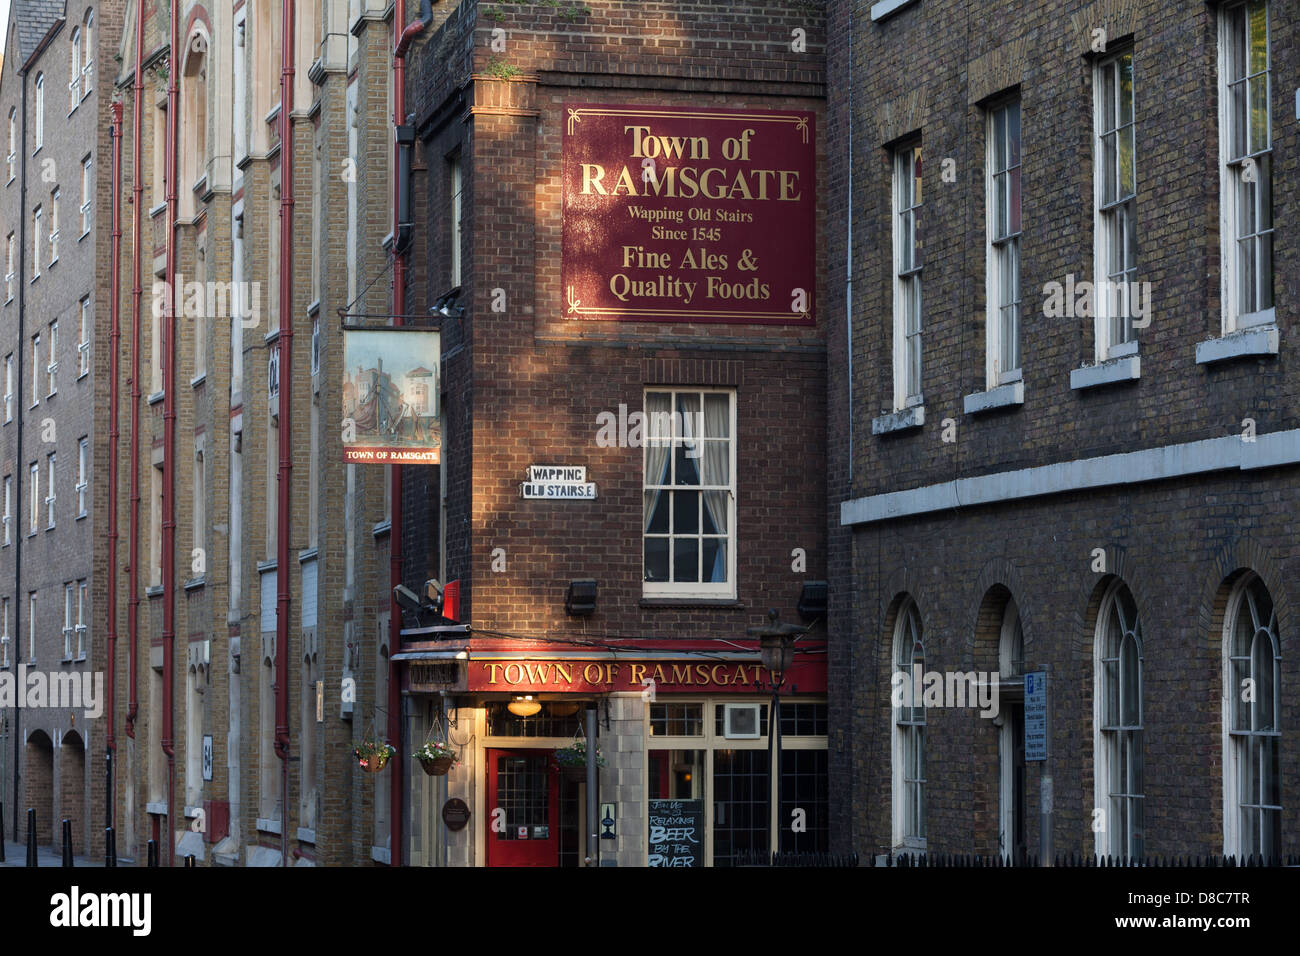 Town of Ramsgate public house, Wapping High Street, London that backs on to the river Thames. Stock Photo